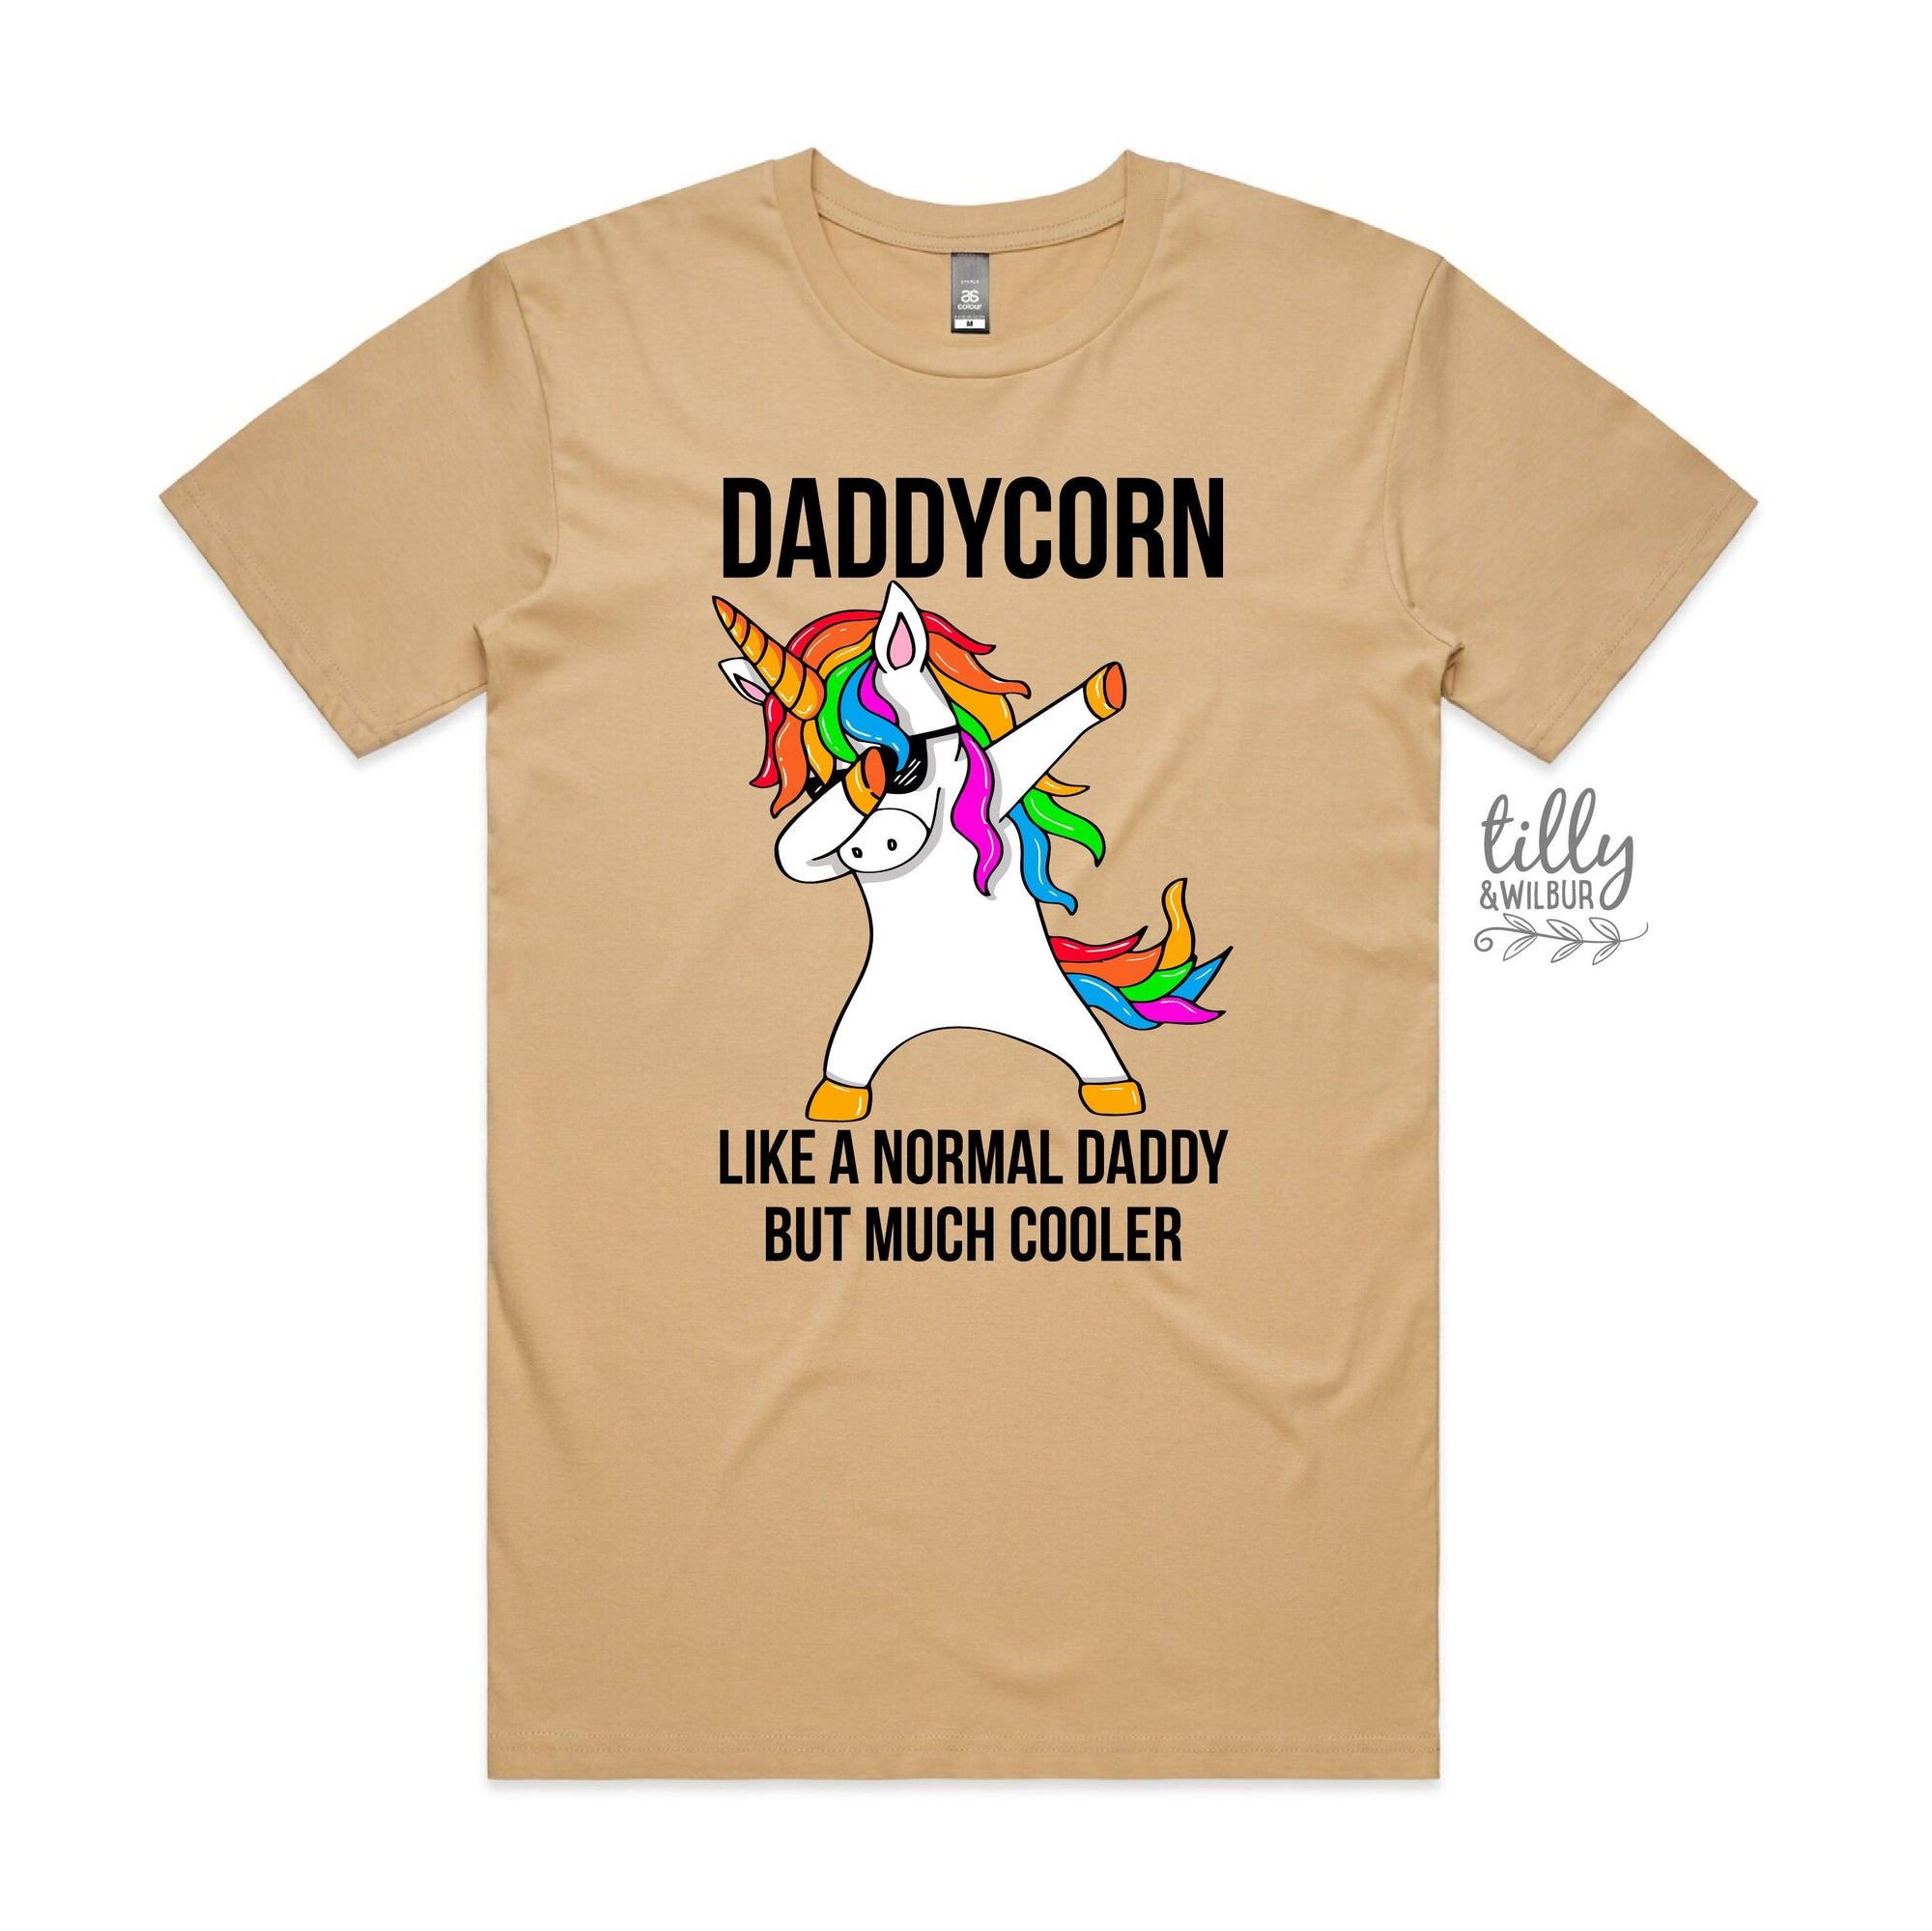 Daddycorn T-Shirt, Funny Dad T-Shirt, Daddycorn Like A Normal Daddy But Much Cooler, Dad Gift, Father's Day Gift, Christmas Gift, Birthday